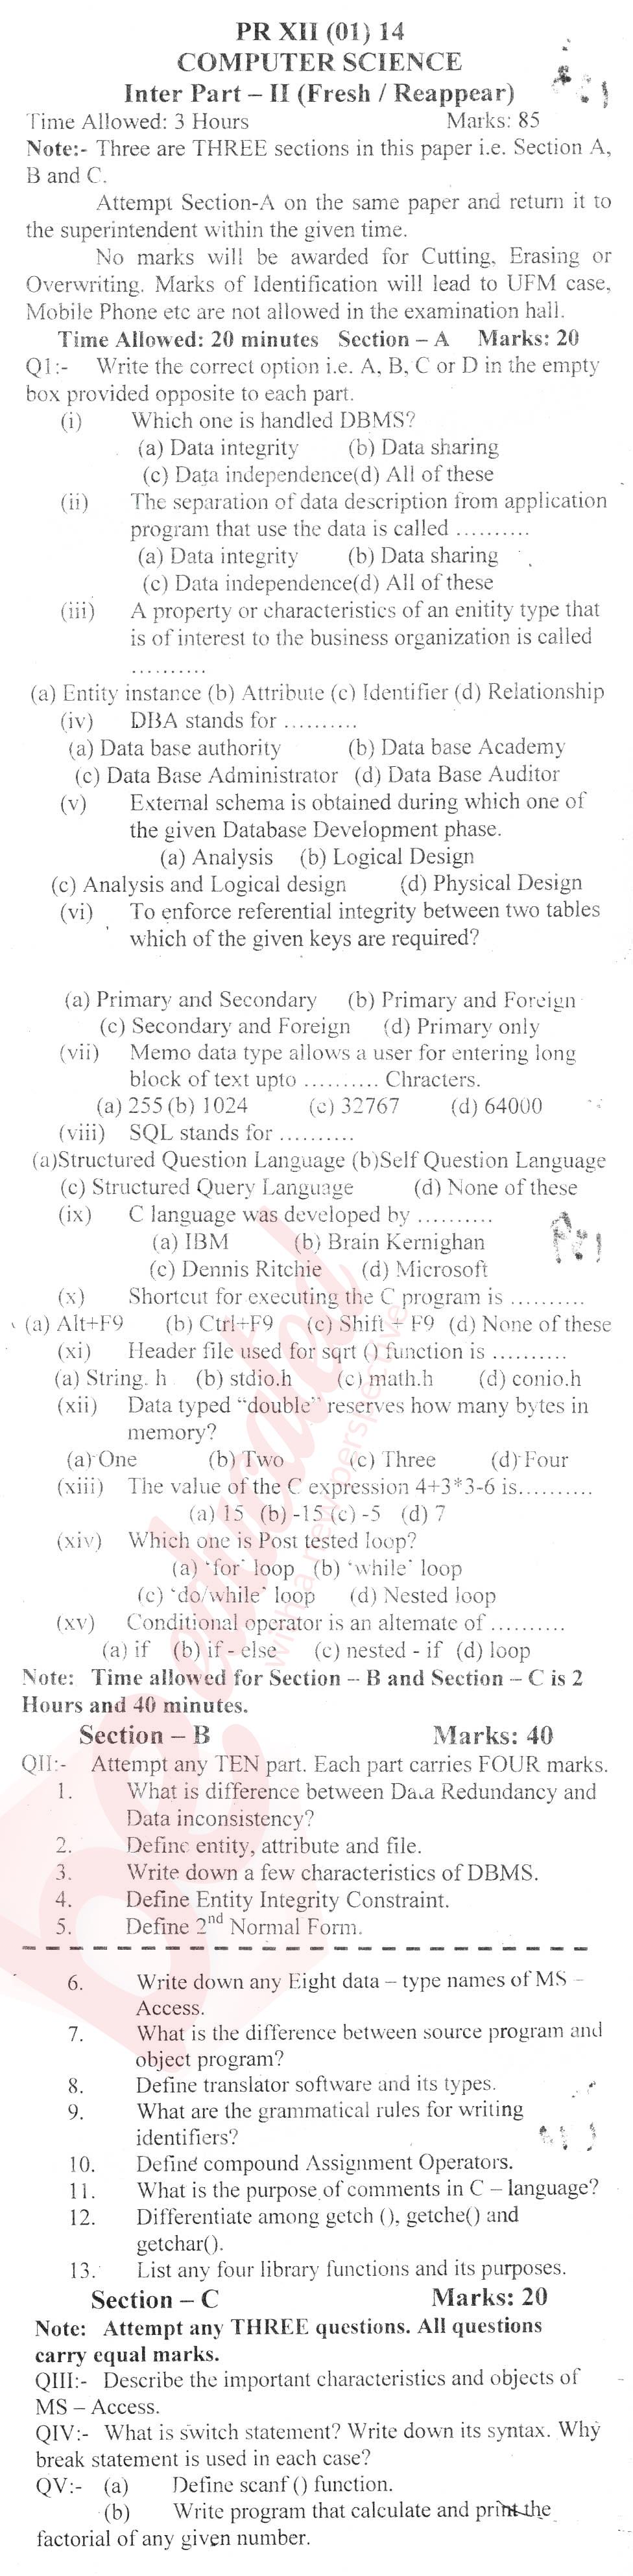 Computer Science ICS Part 2 Past Paper Group 1 BISE Malakand 2014